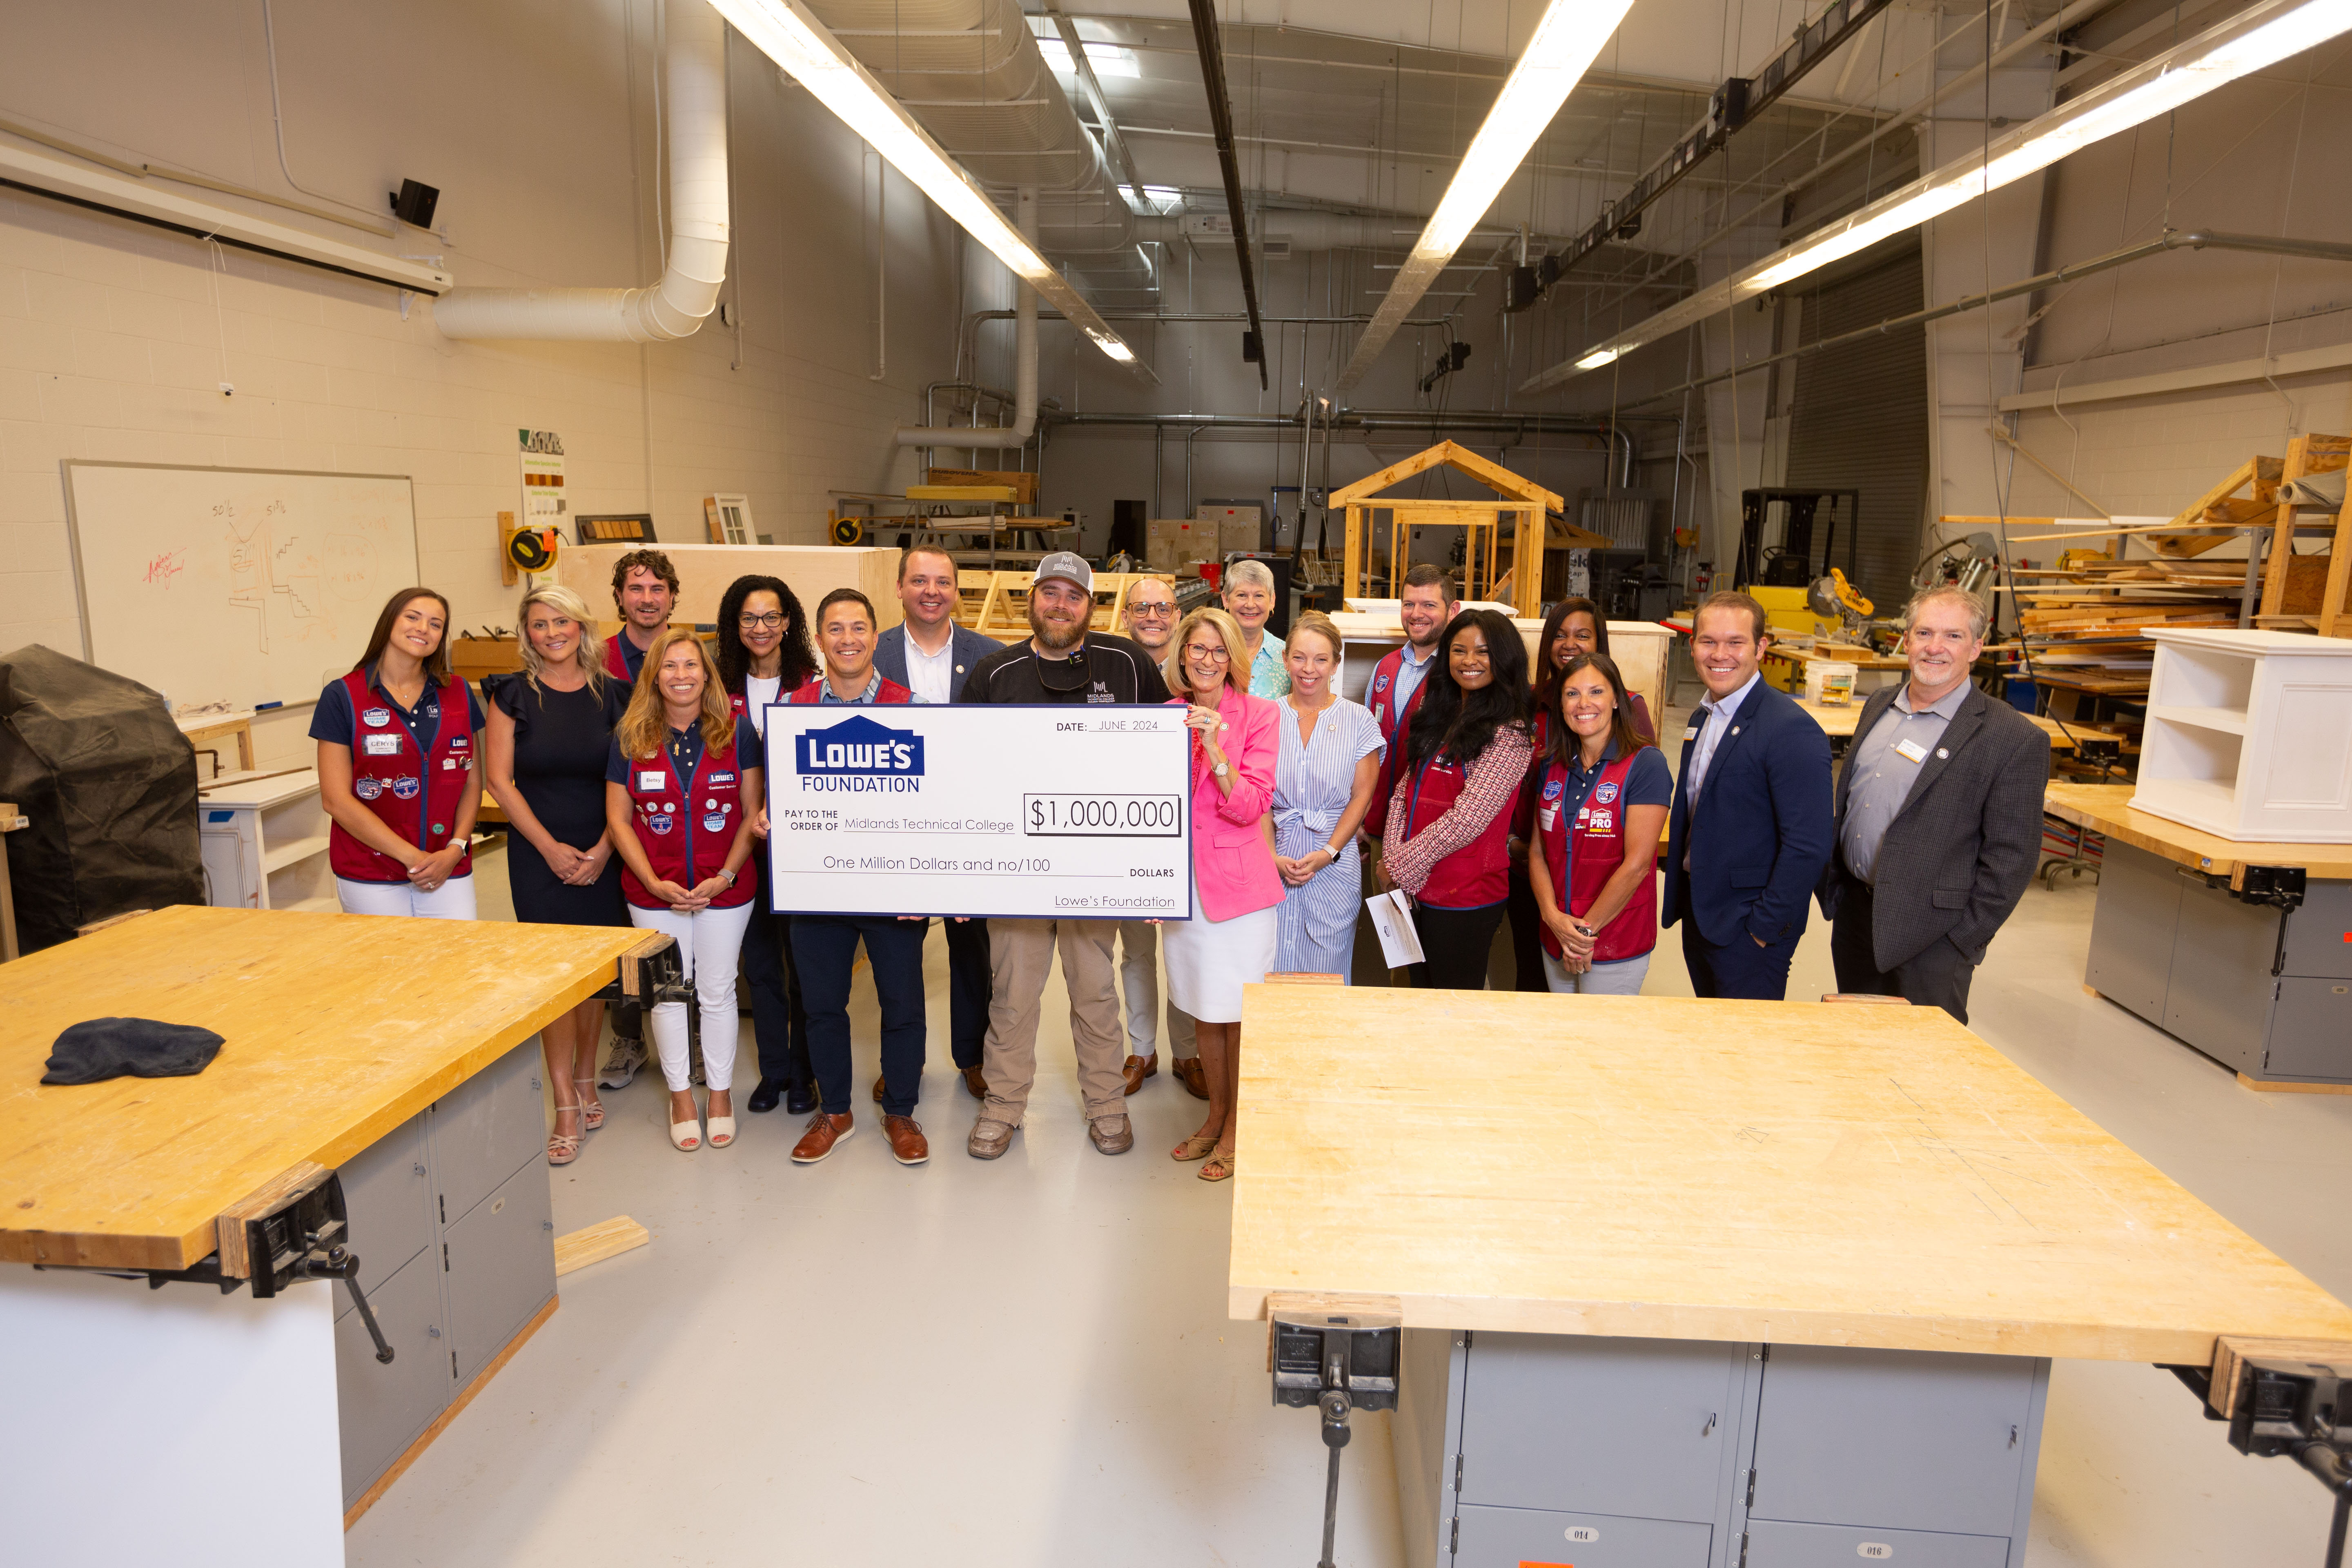 Representatives from the Lowe's Foundation and MTC pose for a group photo with the $1 million Gable Grant check.